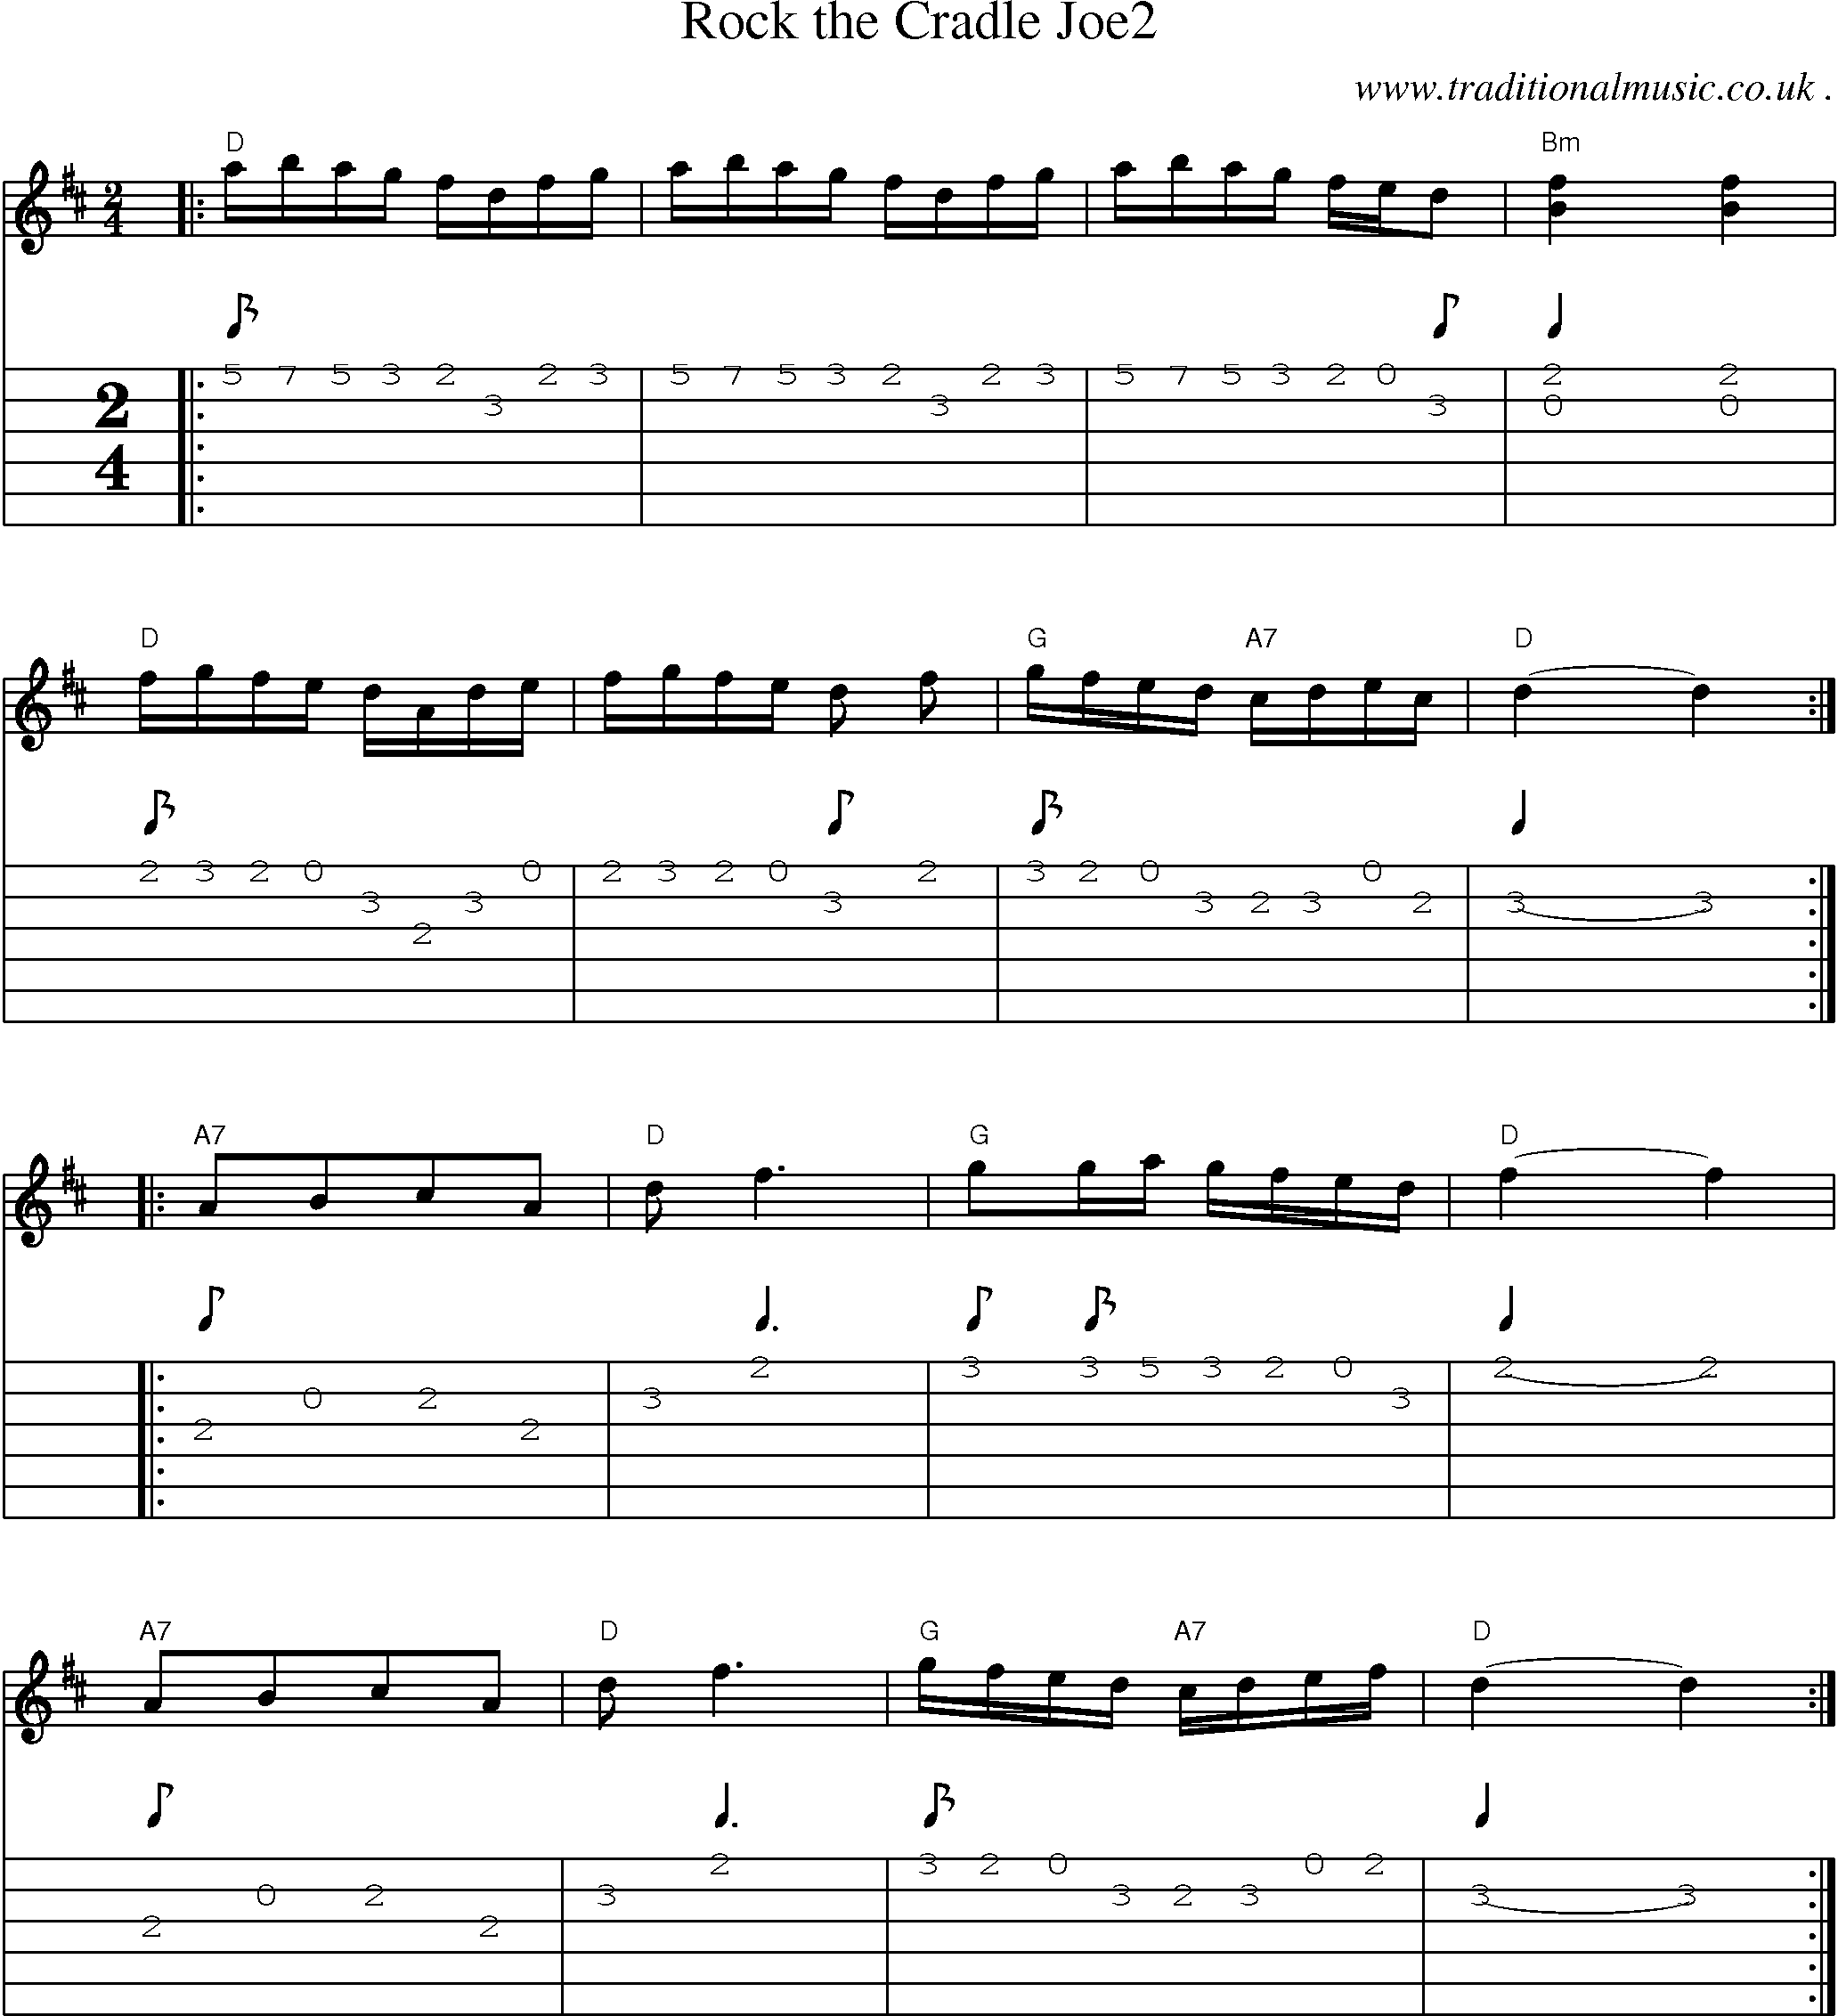 Music Score and Guitar Tabs for Rock The Cradle Joe2